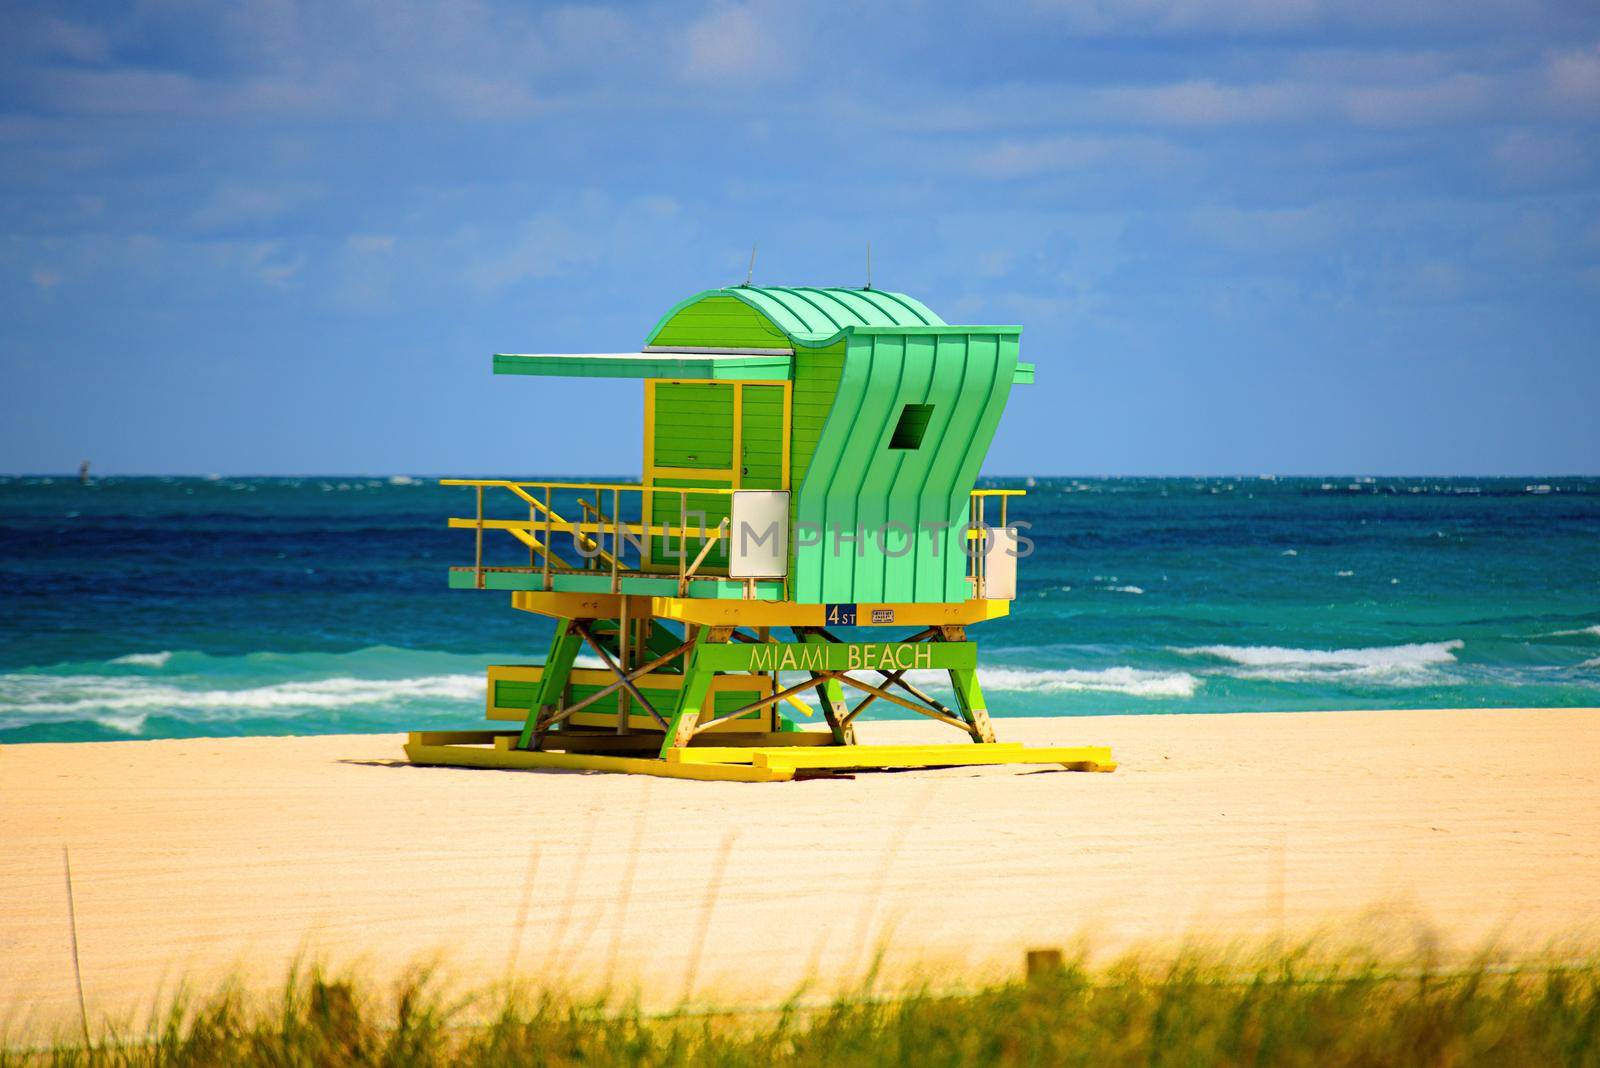 Miami Beach with lifeguard tower and coastline with colorful cloud and blue sky